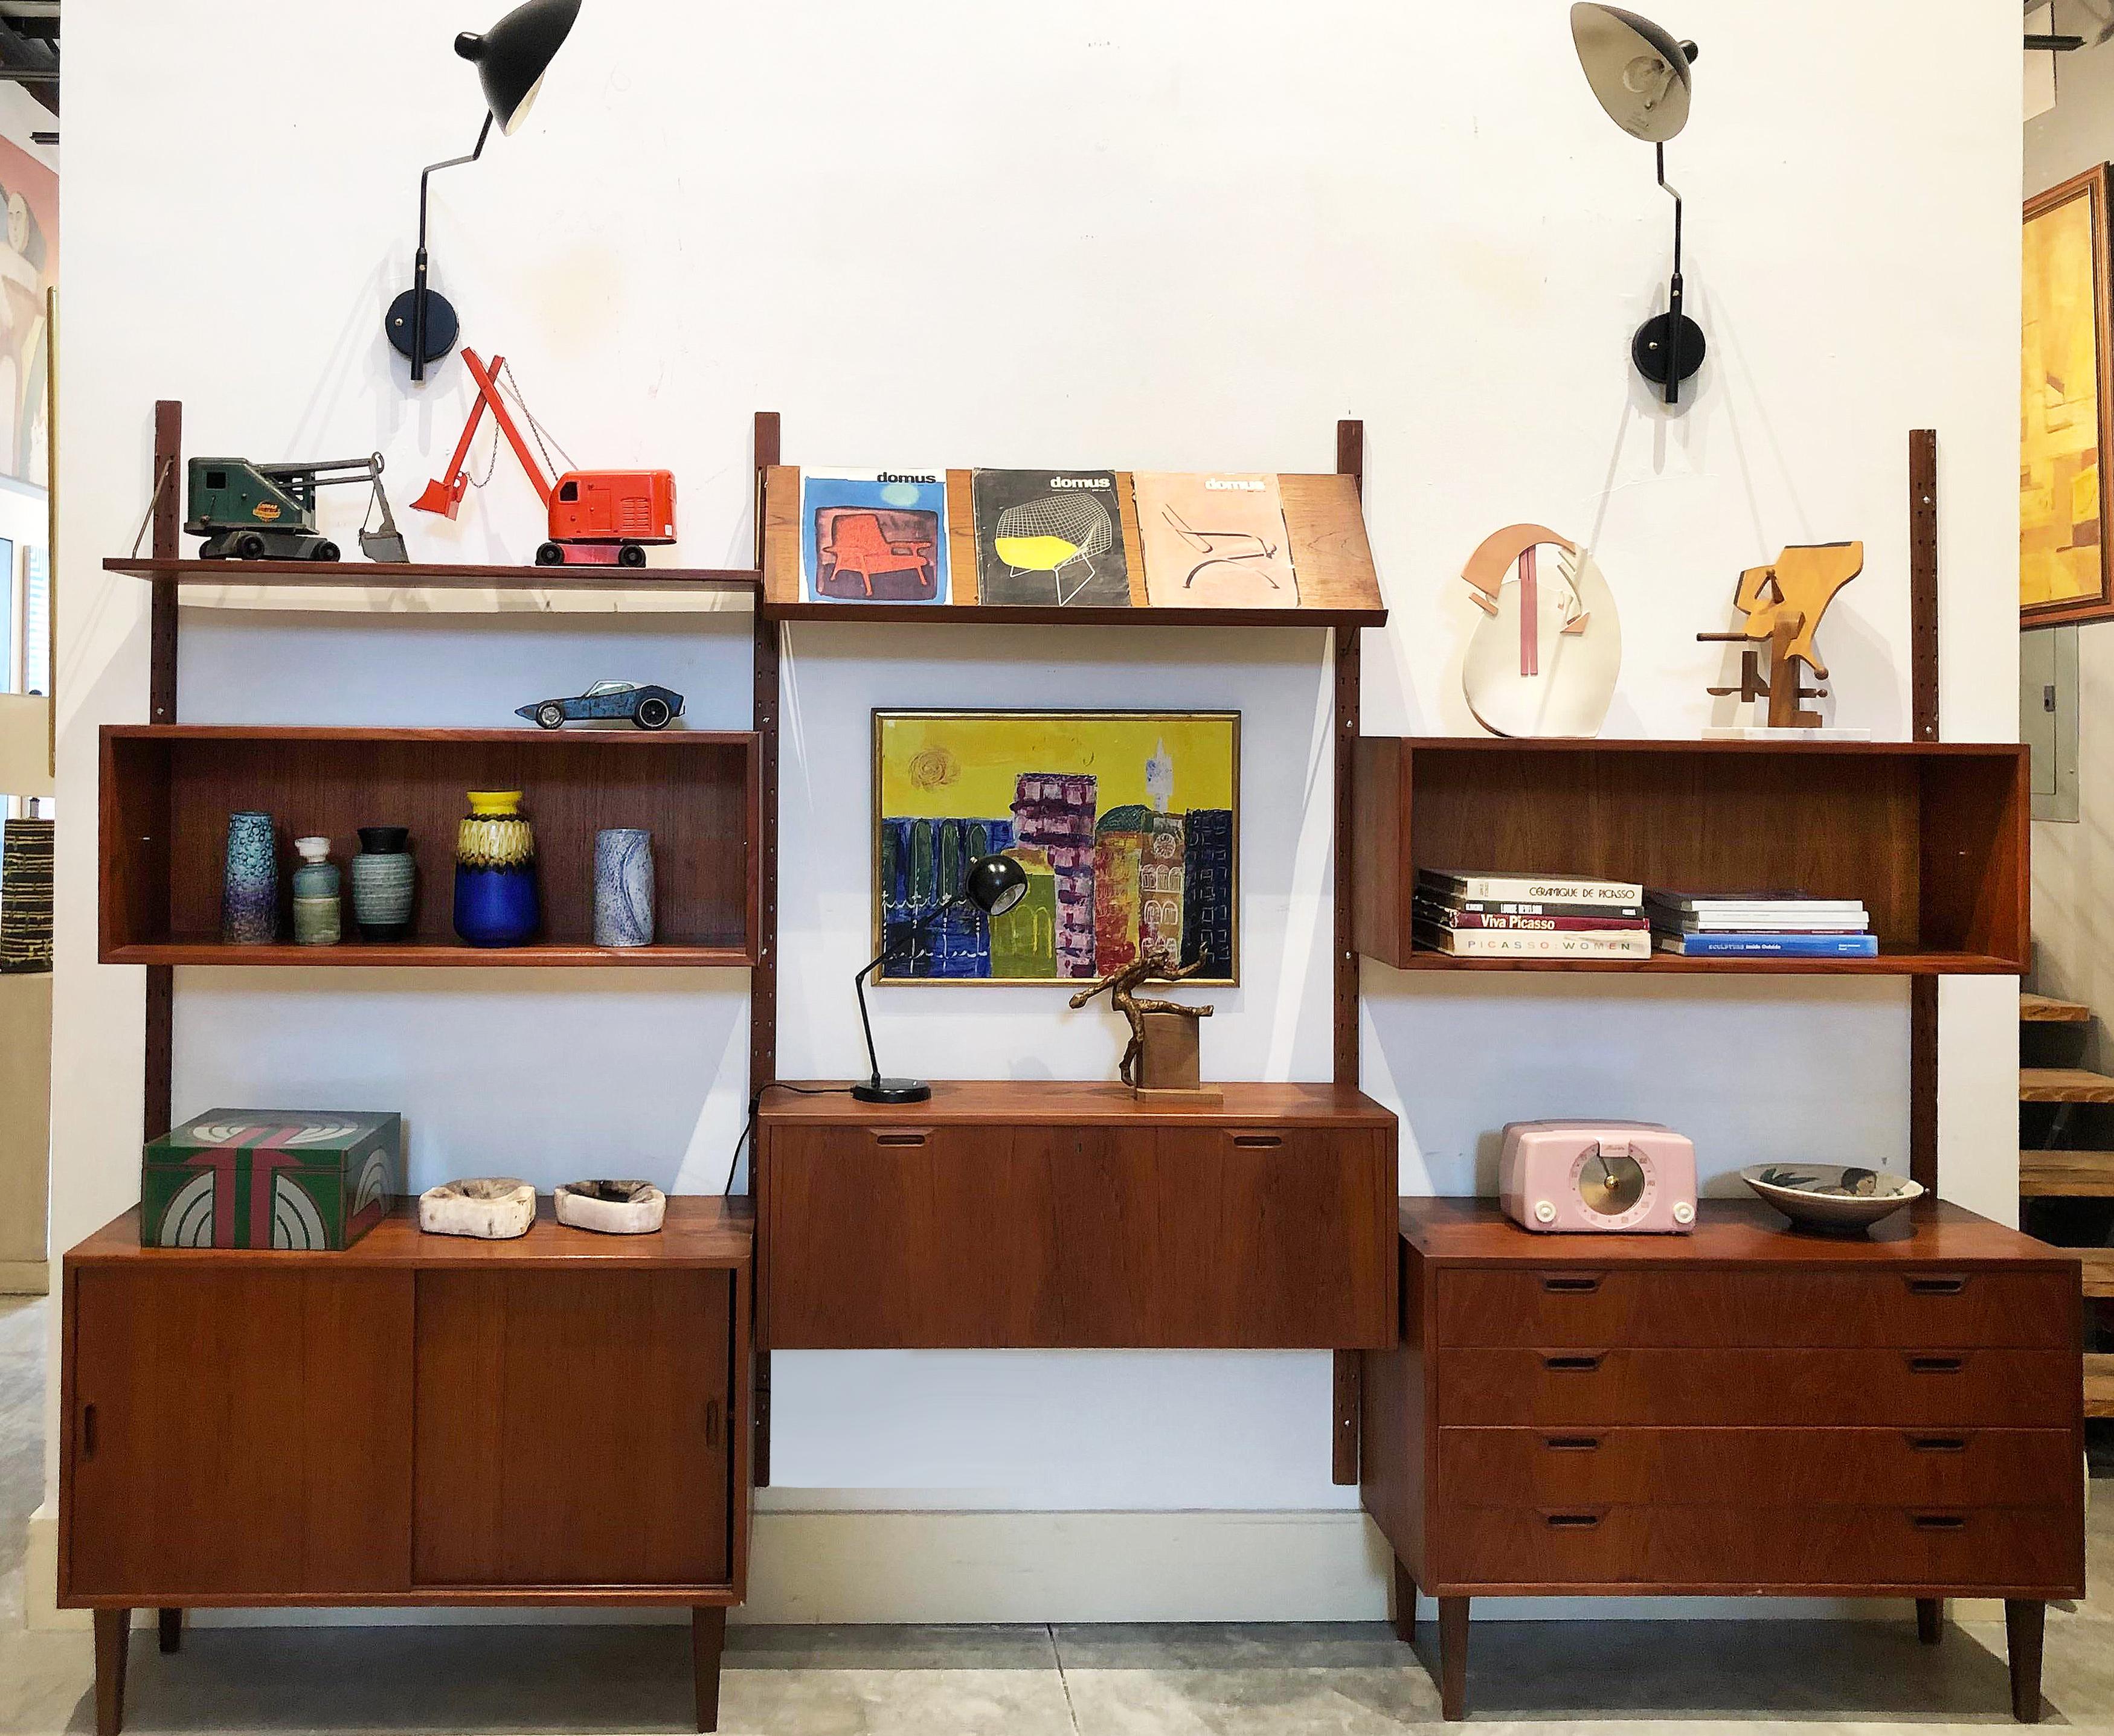 Danish modern teak wall unit by Poul Cadovius, Attributed 1950s



Offered for sale is an iconic Danish Modern teak modular wall unit attributed to Poul Cadovius. There is a cabinet with shelves on the left and another 4-drawer cabinet on the